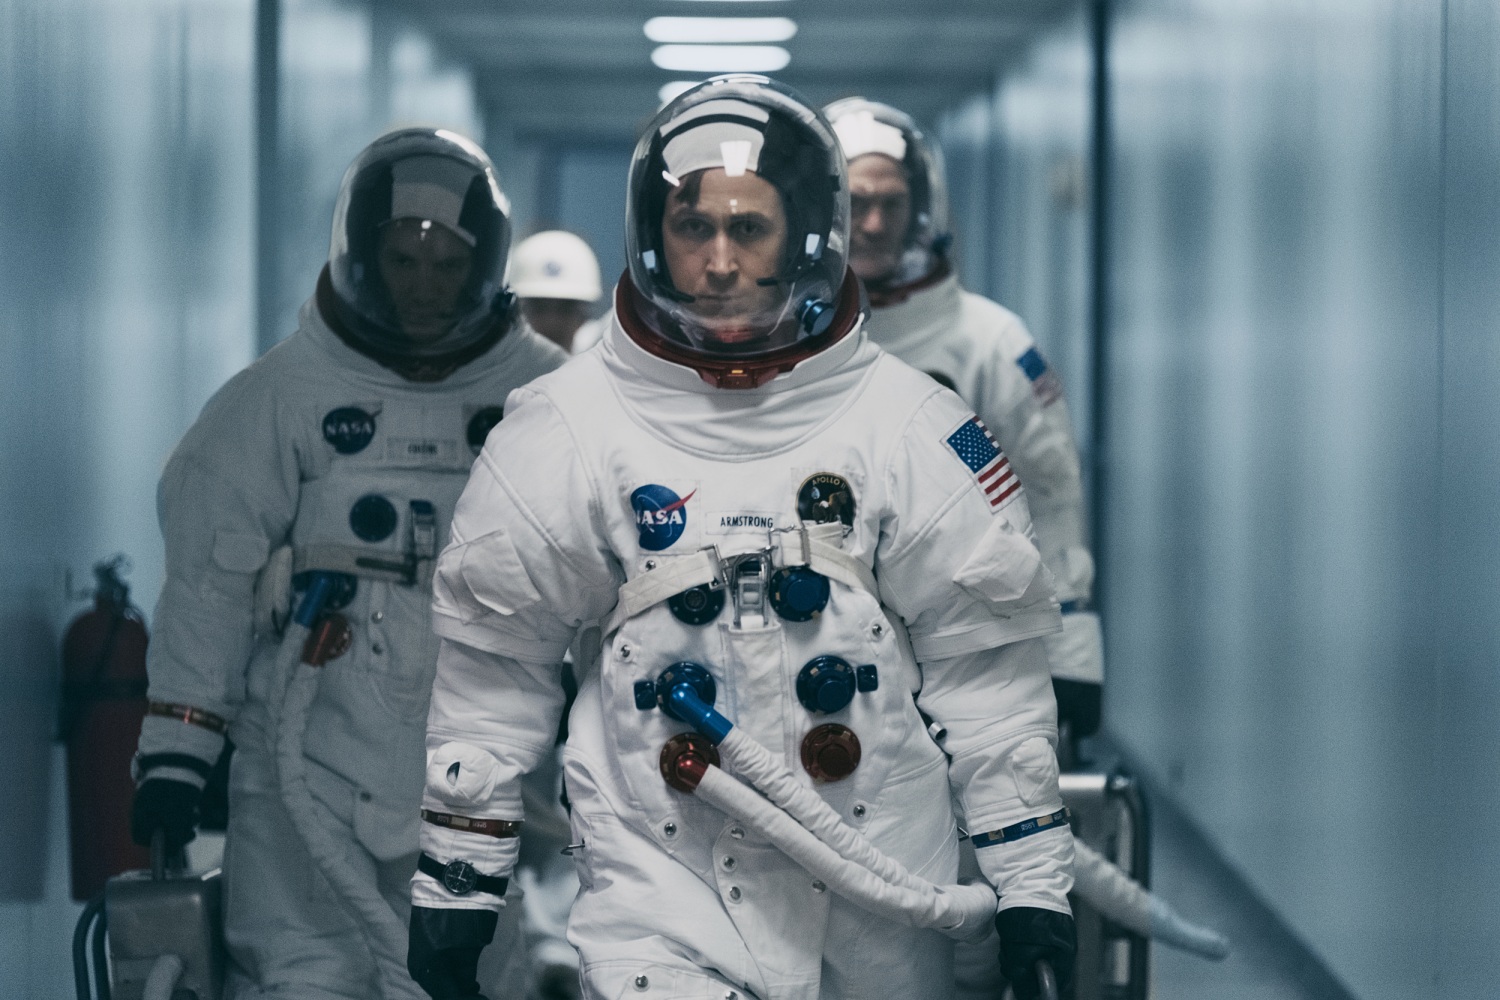 Ryan Gosling shoots for the moon in 'First Man' trailer